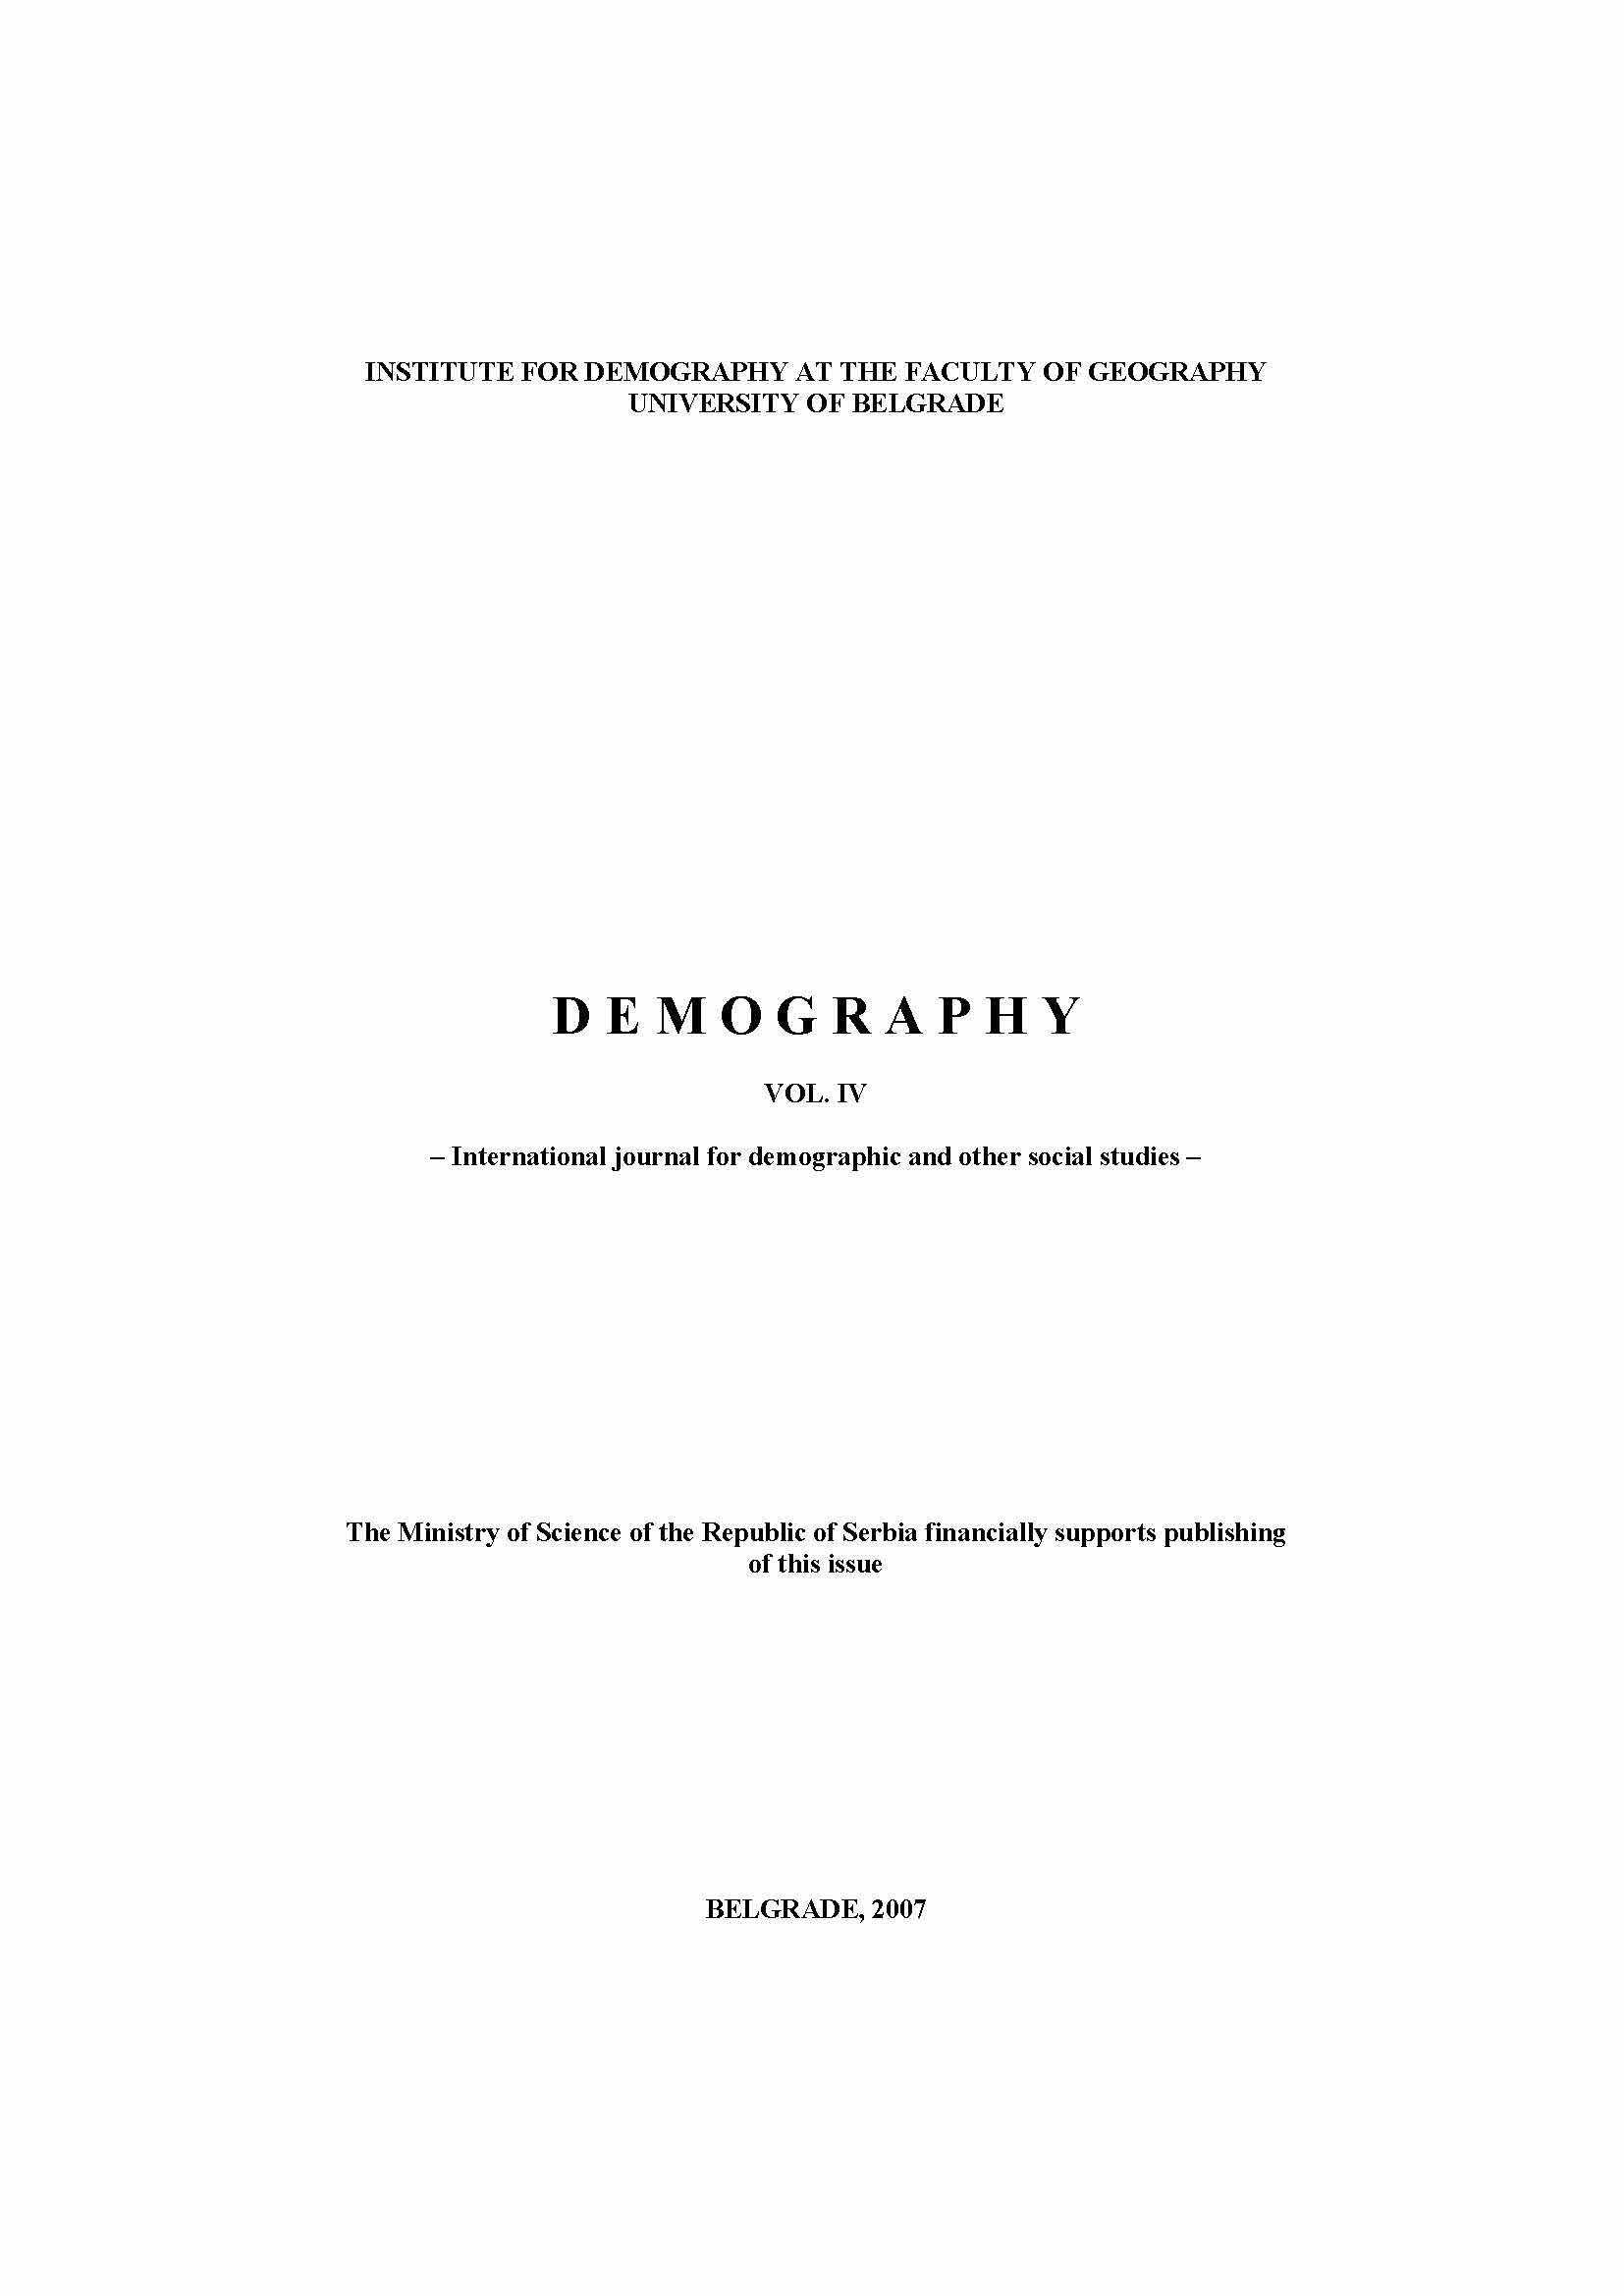 Bela Voda – Modern Demographic Processes and Problems Cover Image